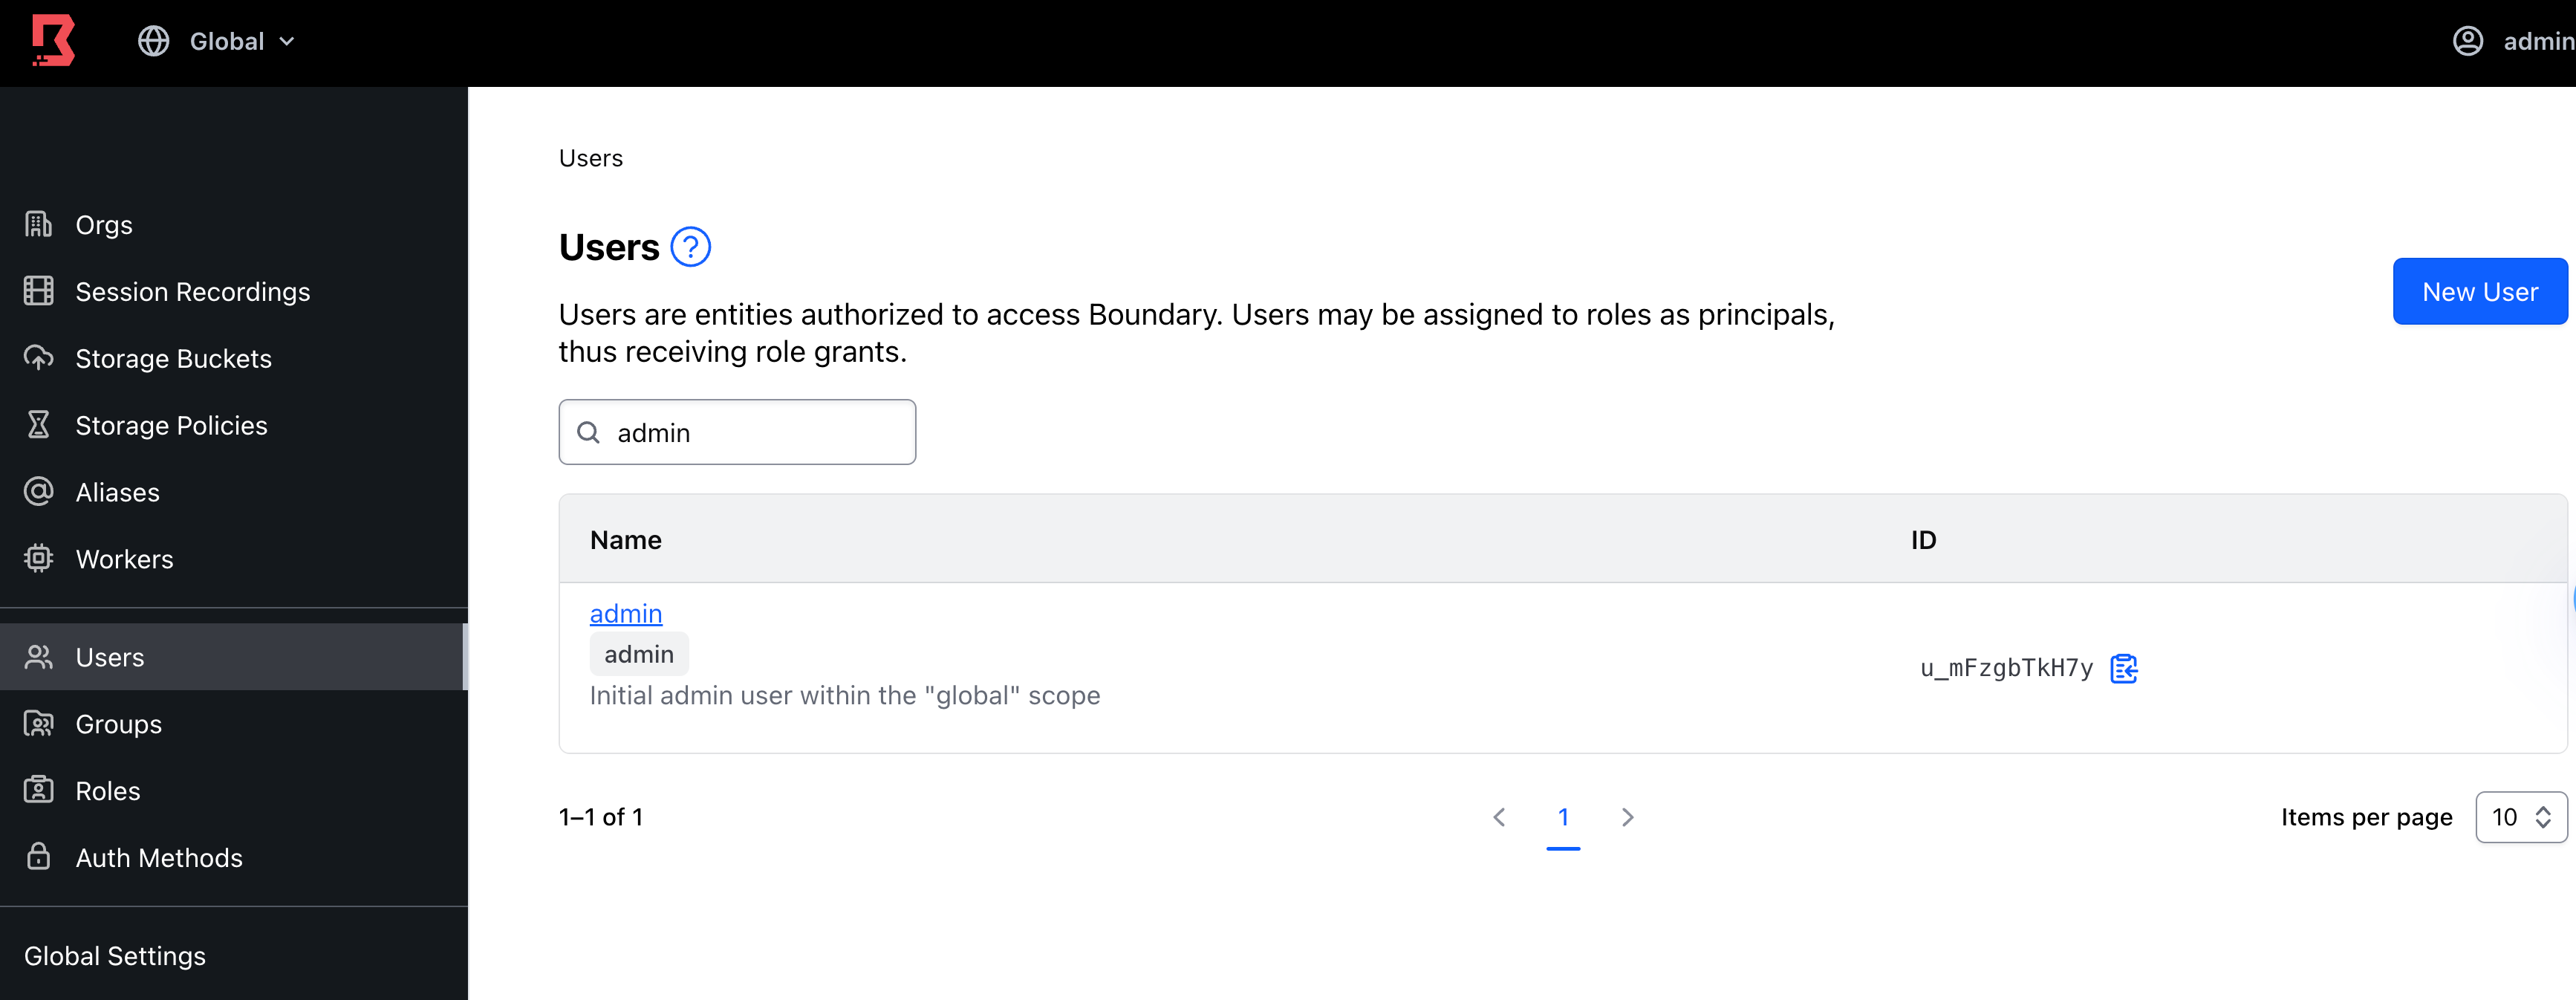 New user search interface for user resources in Boundary 0.16